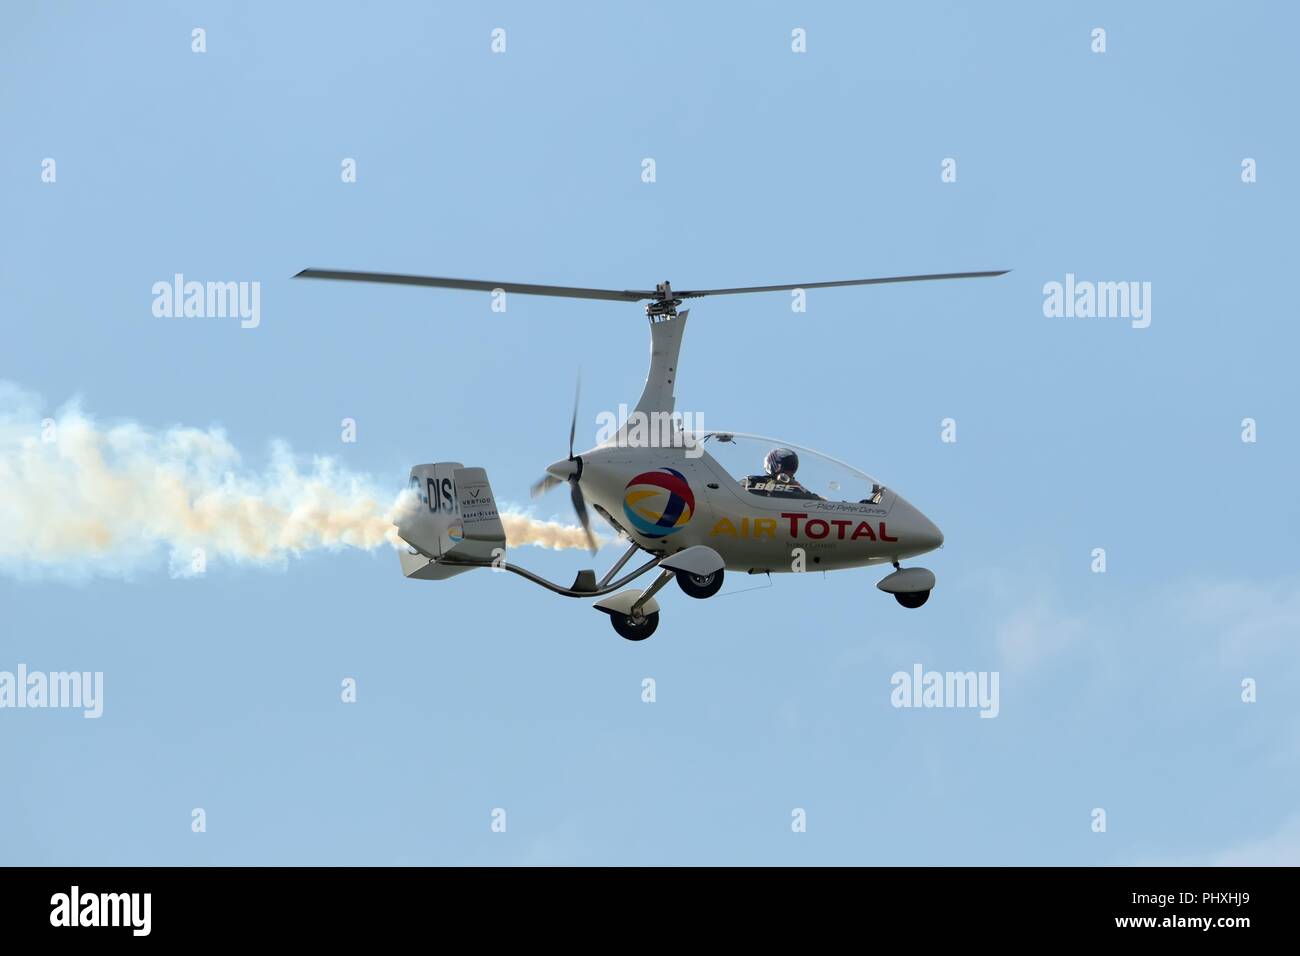 Sunday, 2nd, September, 2018. Ayr, Scotland, UK. An autogyro, also known as a gyro-plane or gyrocopter performed for the crowds on the second day of the Scottish International airshow which was threatened by strong winds and low clouds. Most of the program was performed though to the delight of the crowds. Stock Photo